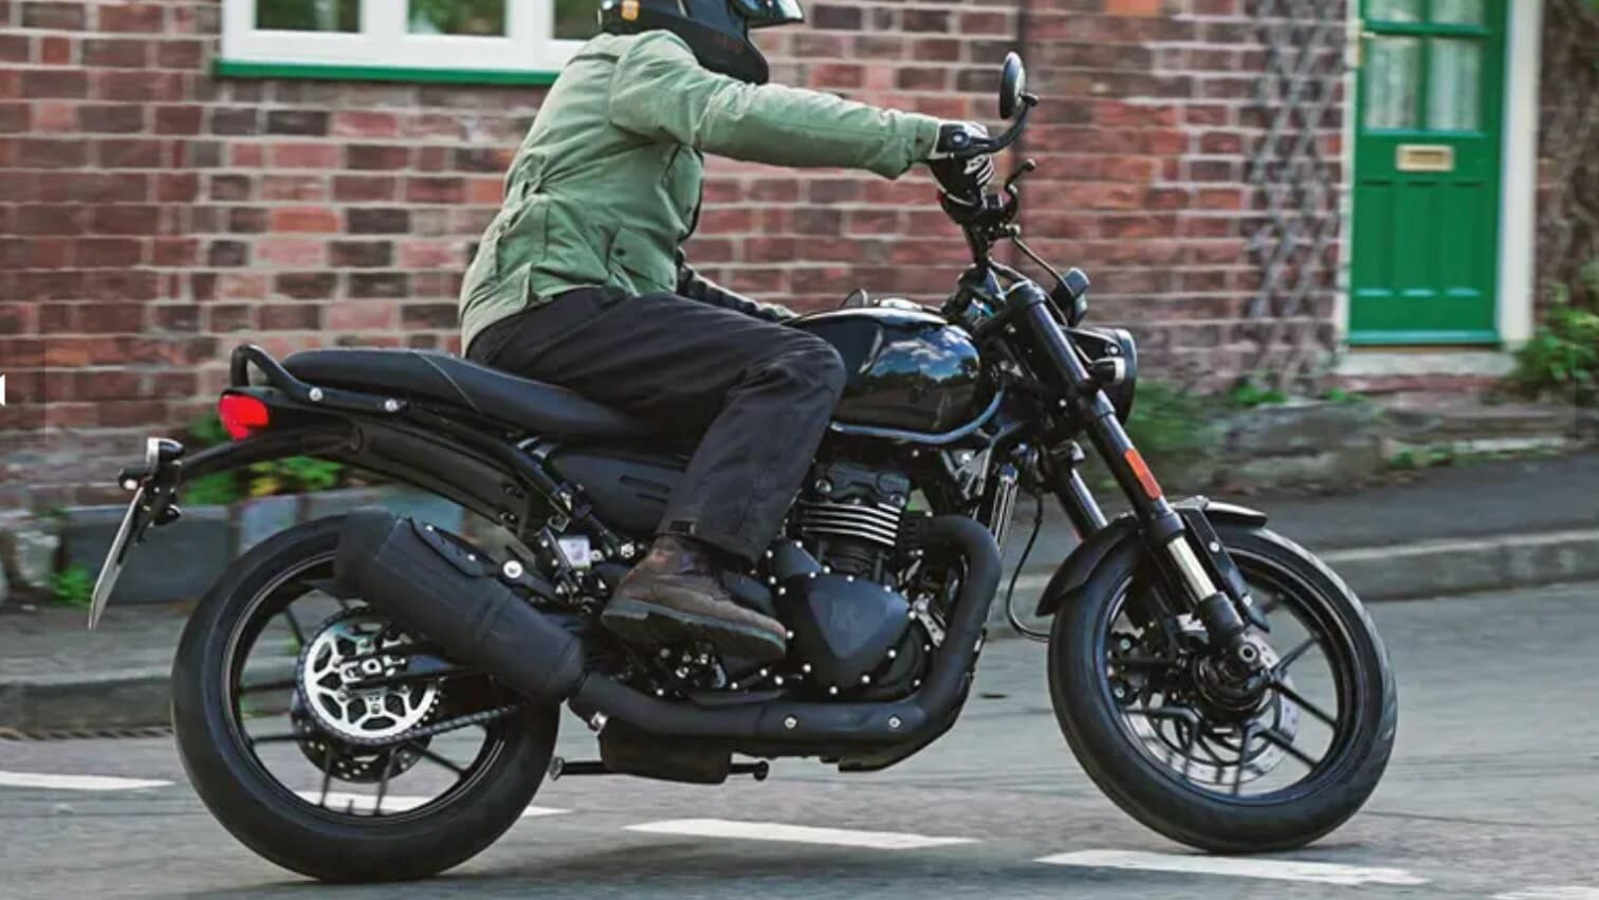 Five things to know about the upcoming Bajaj-Triumph motorcycle